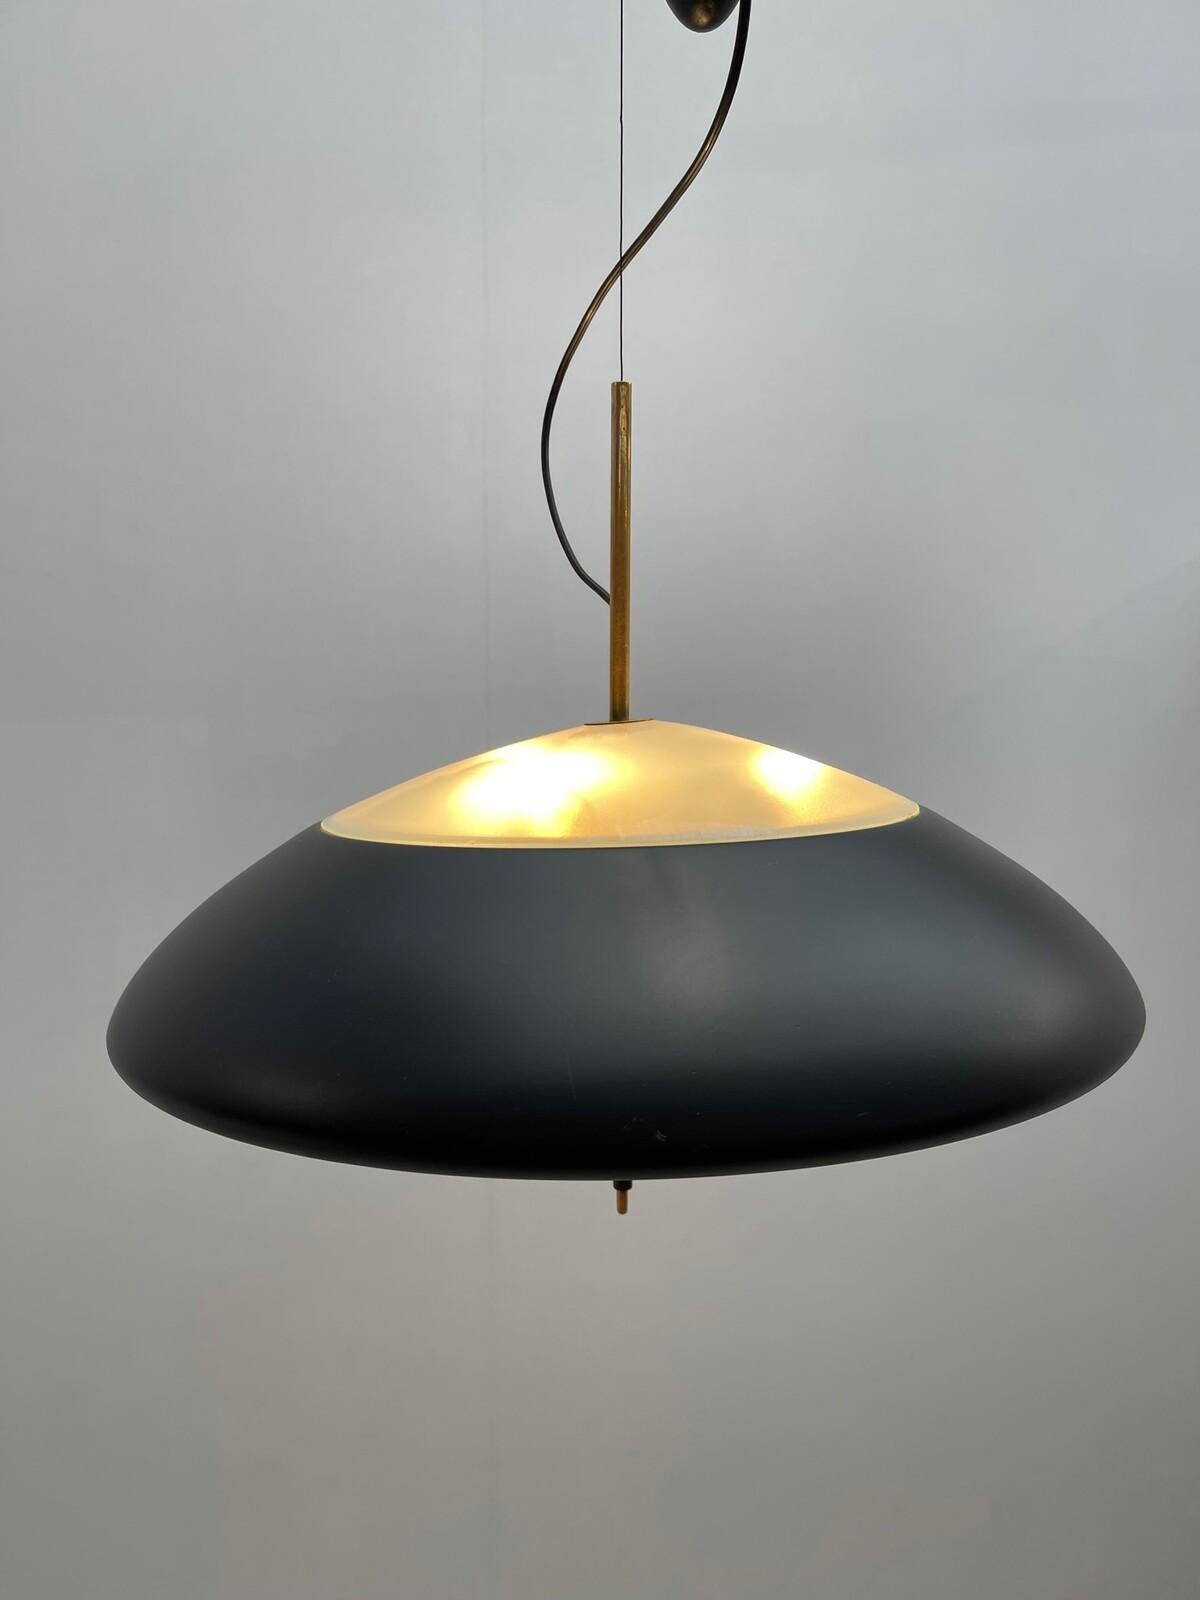 Mid-20th Century Mid-Century Modern Suspension with Counterweight by Oscar Torlasco, Italy, 1950s